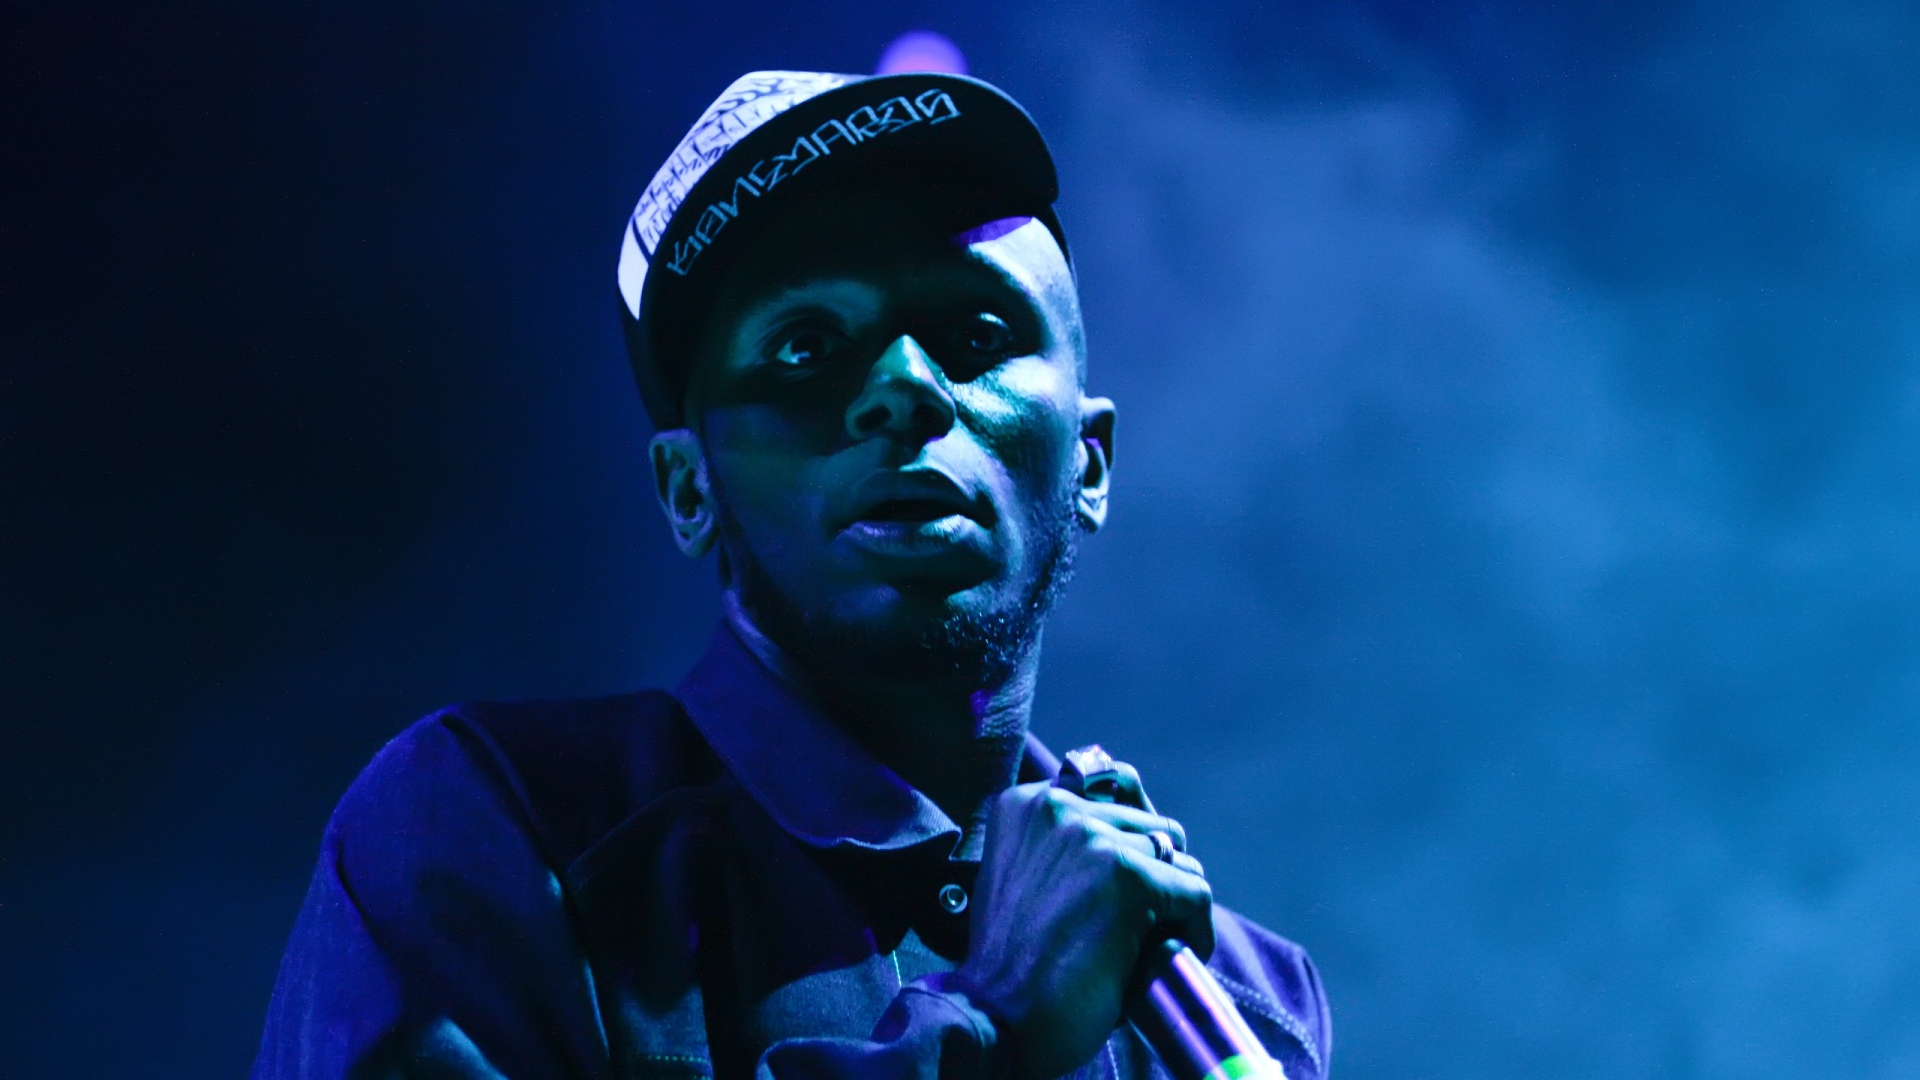 Mos Def for 1920 x 1080 HDTV 1080p resolution